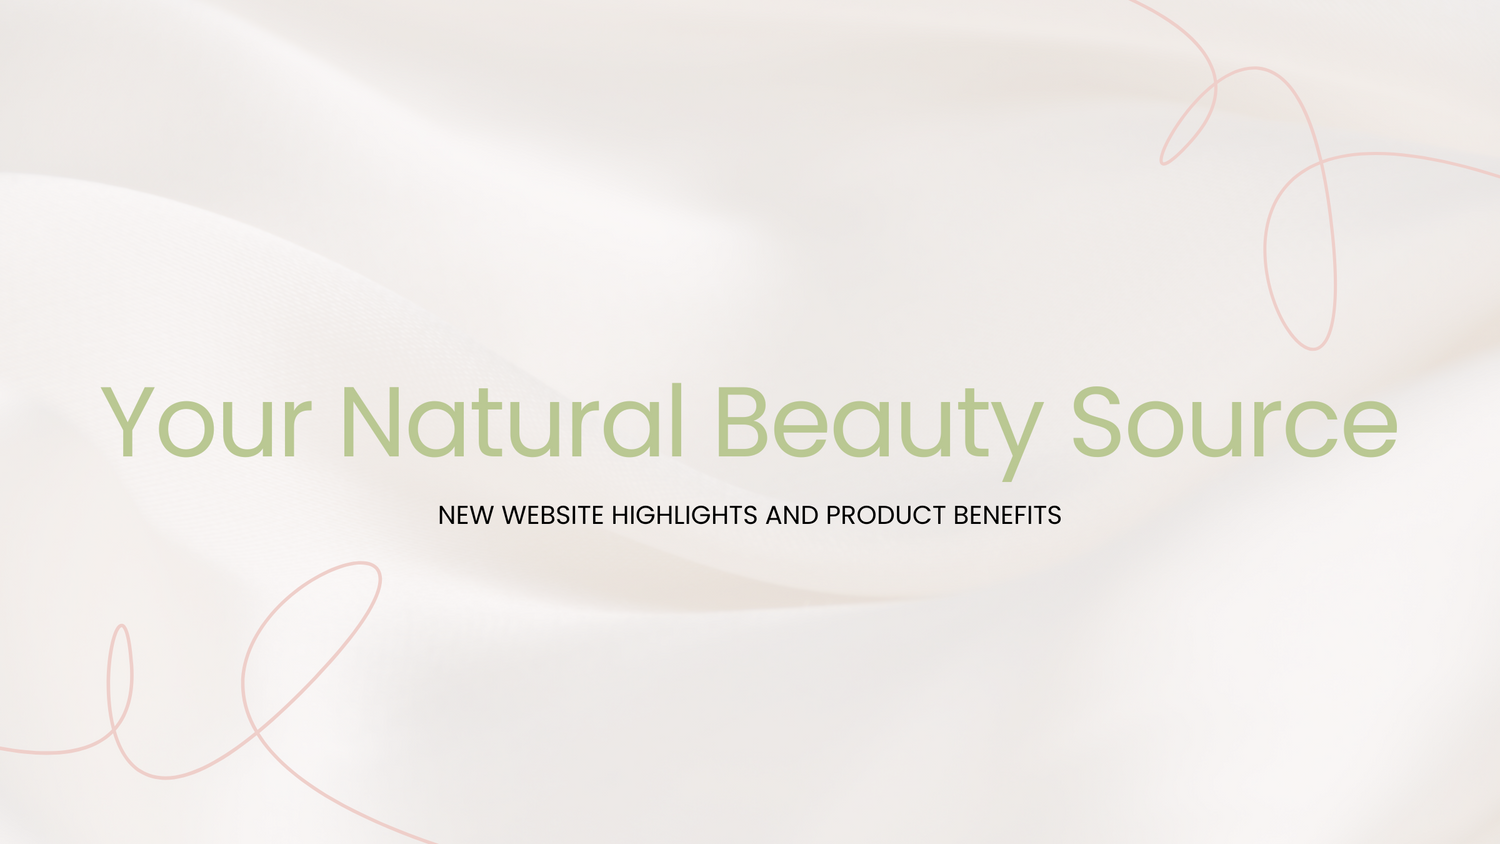 Your Natural Beauty Source